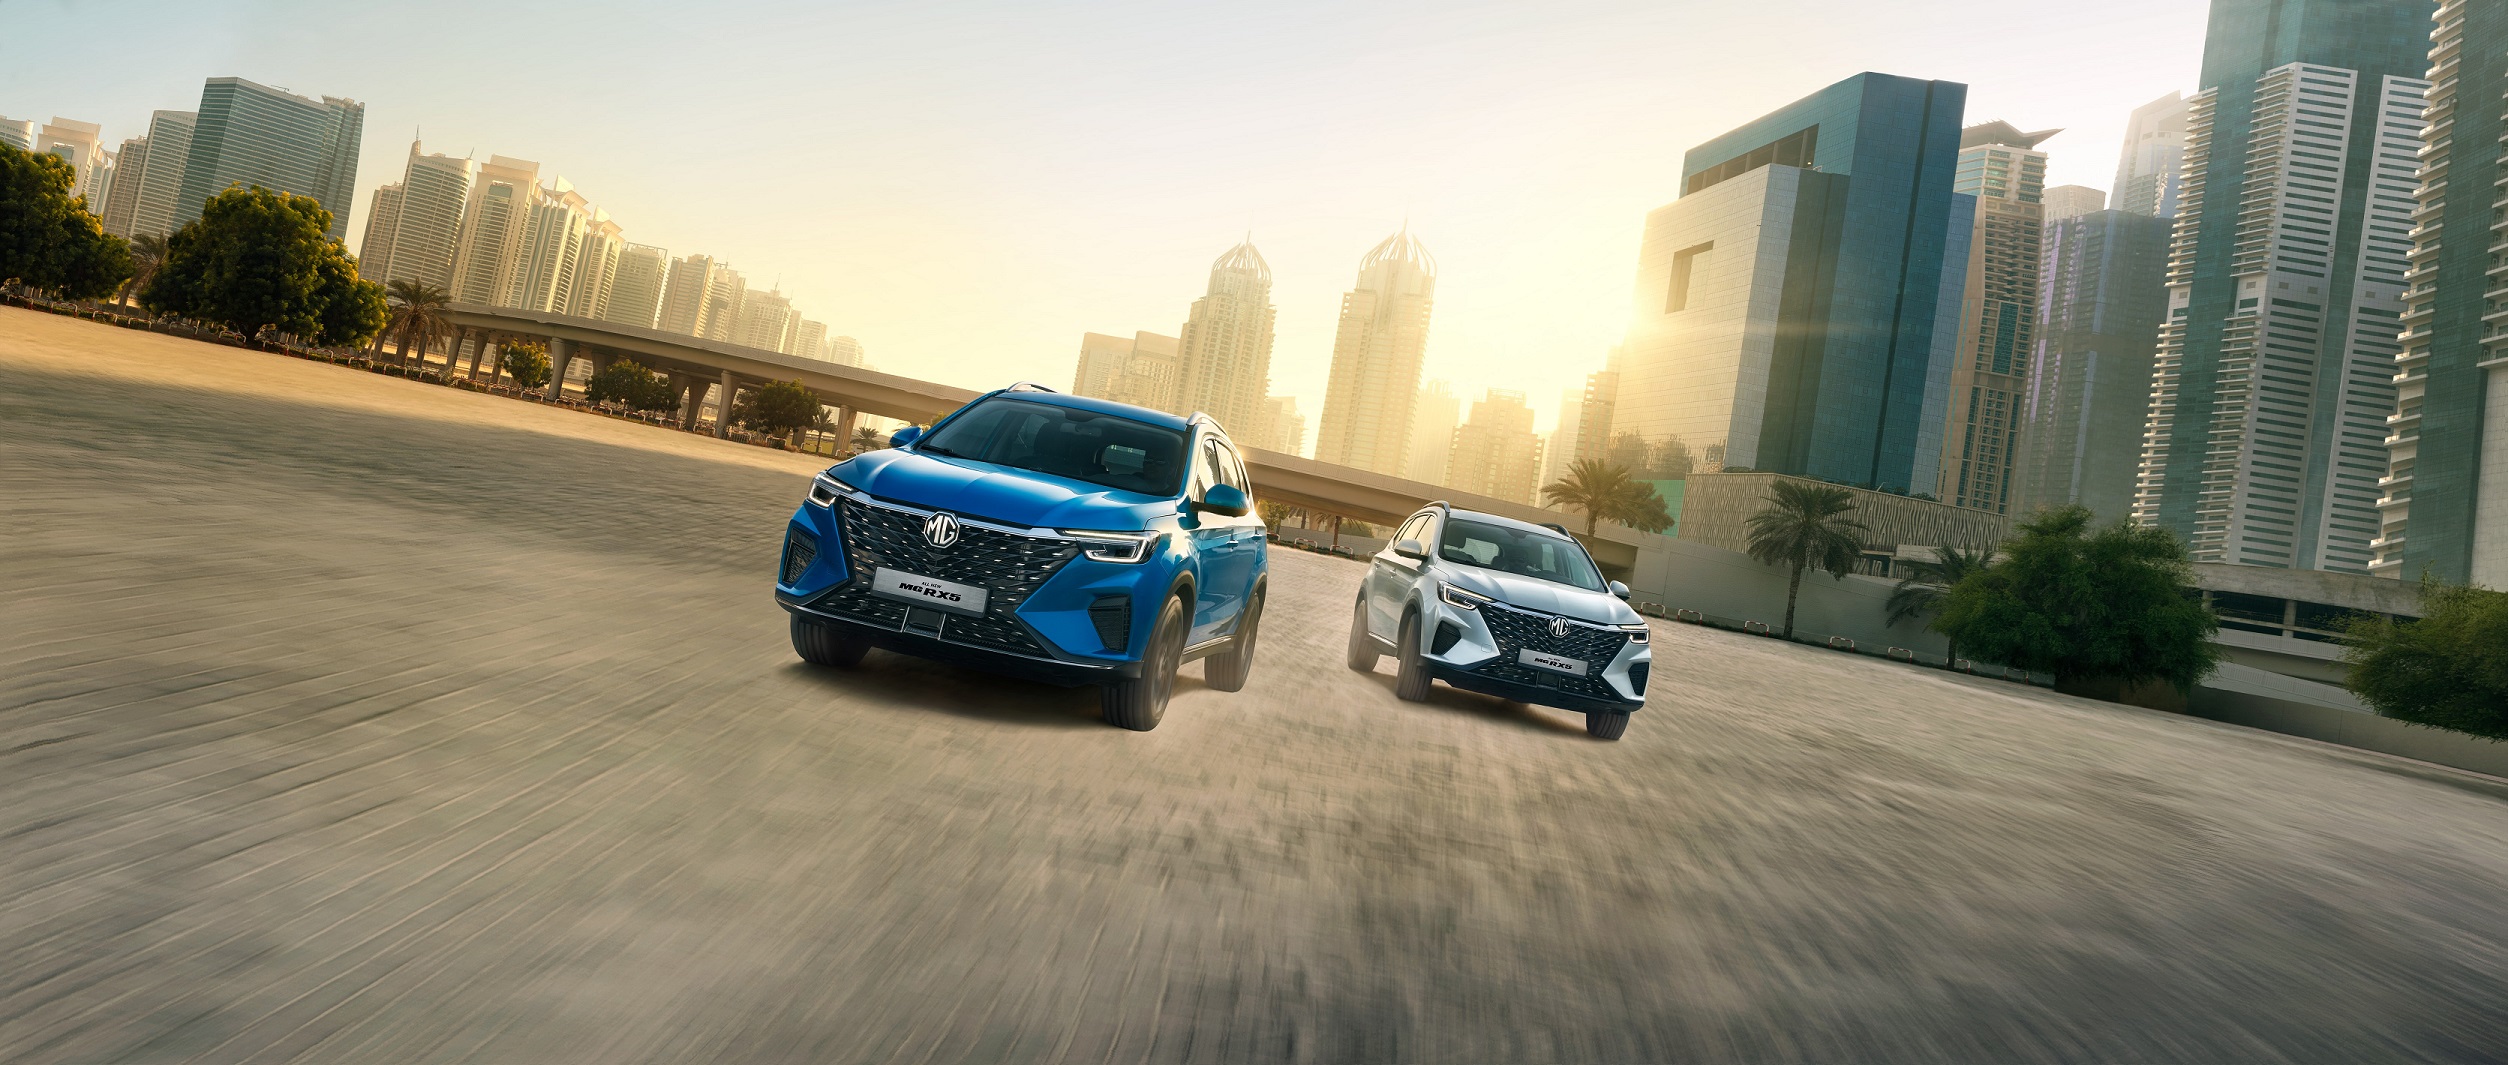 Inter Emirates Motors Provides a Refined Experience to Fuel Moments That Matter with the Launch of the all-new 2023 MG RX5 in the UAE